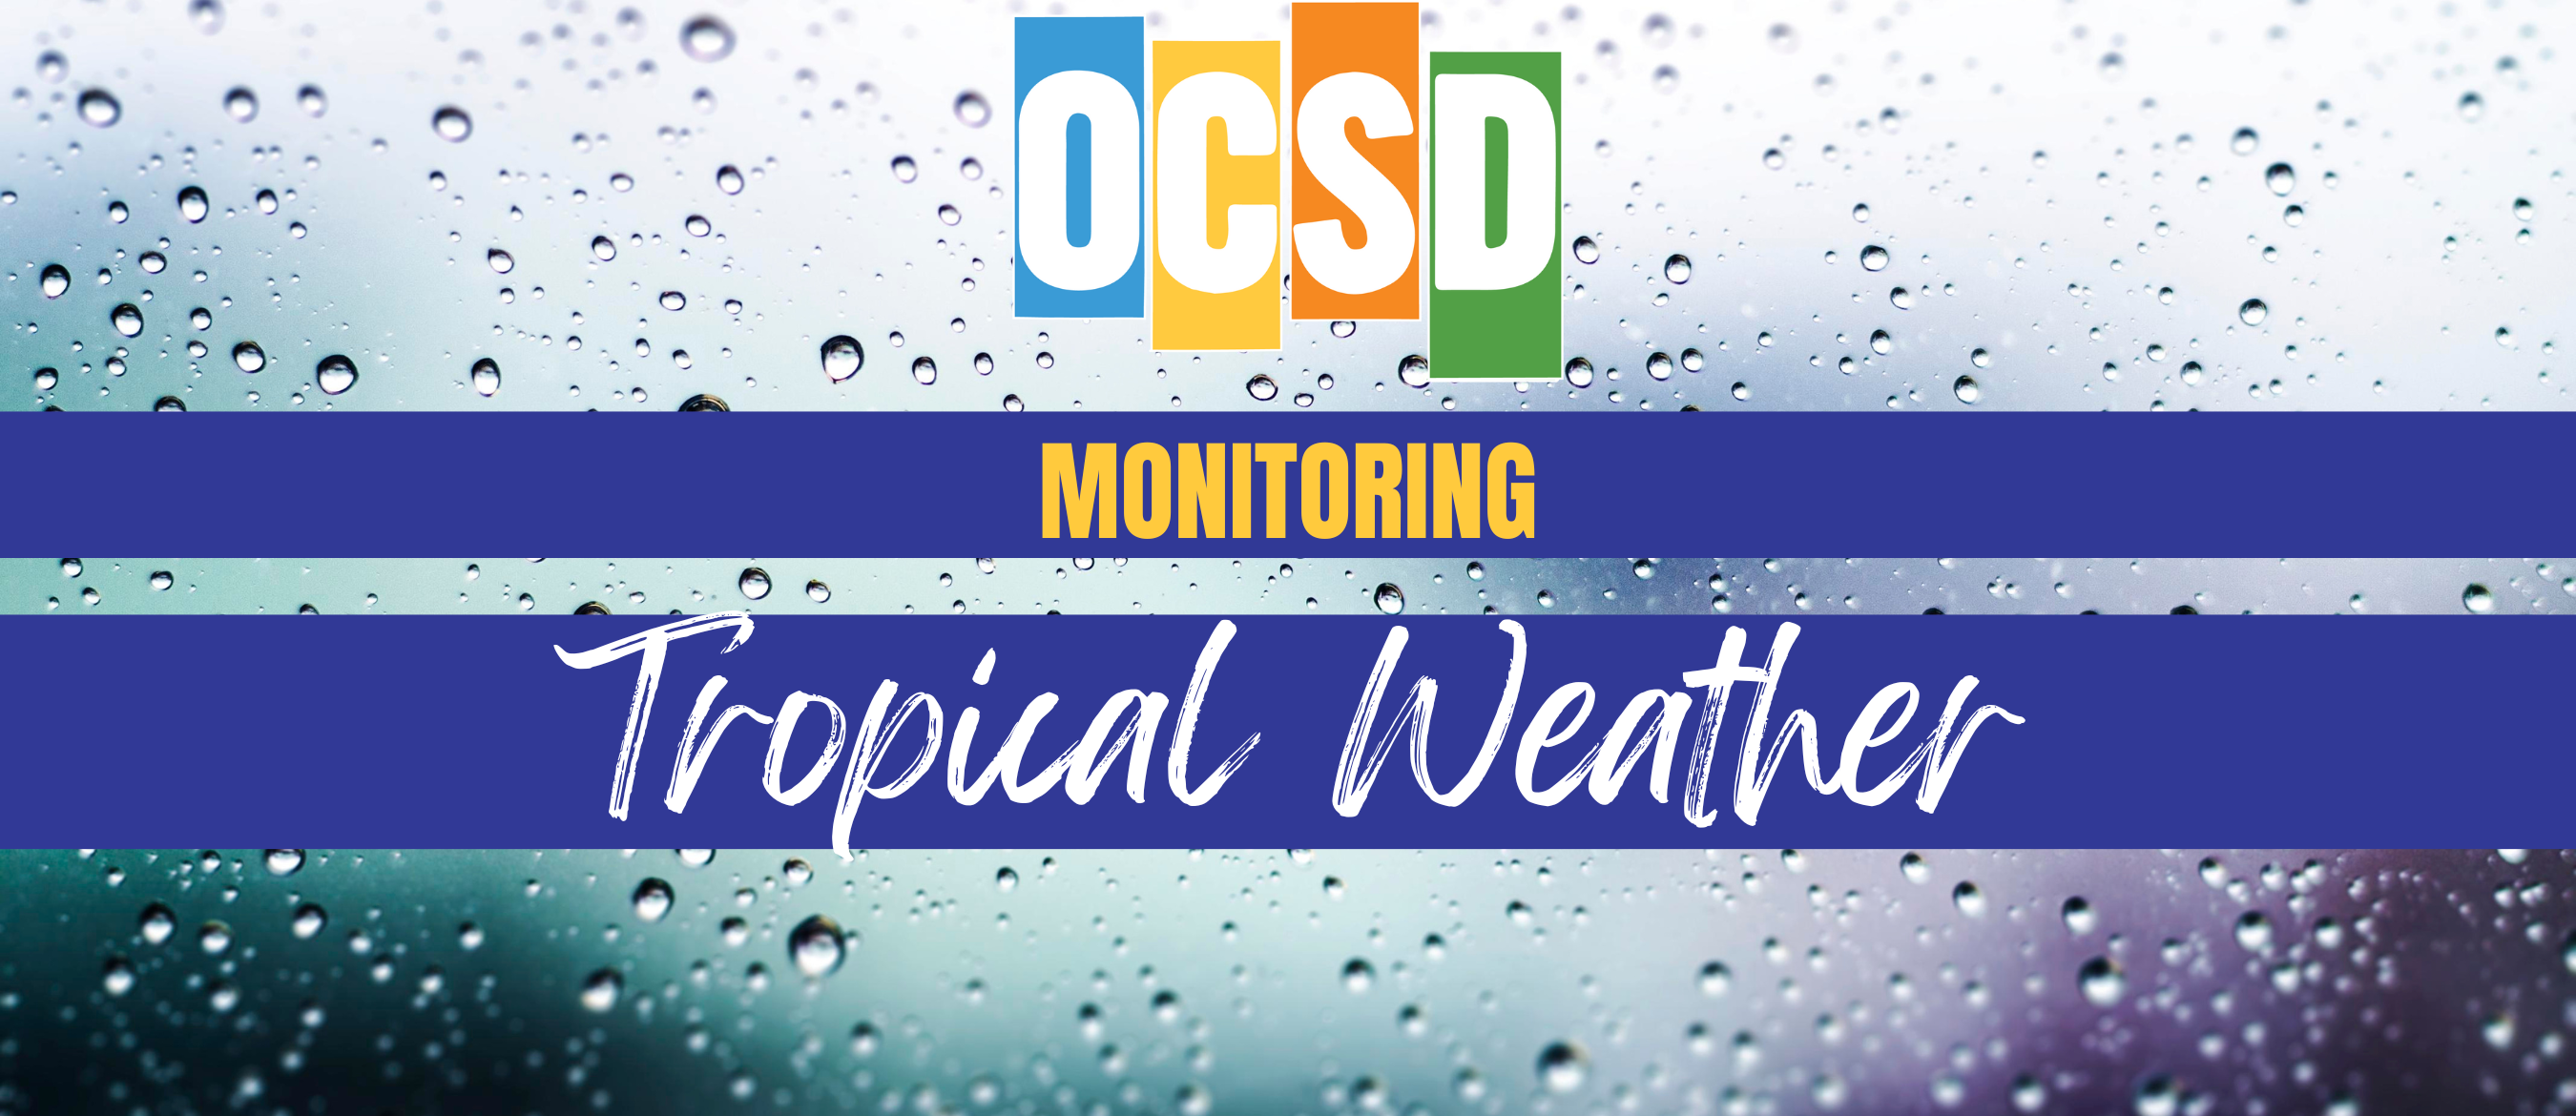 Monitoring Tropical Weather